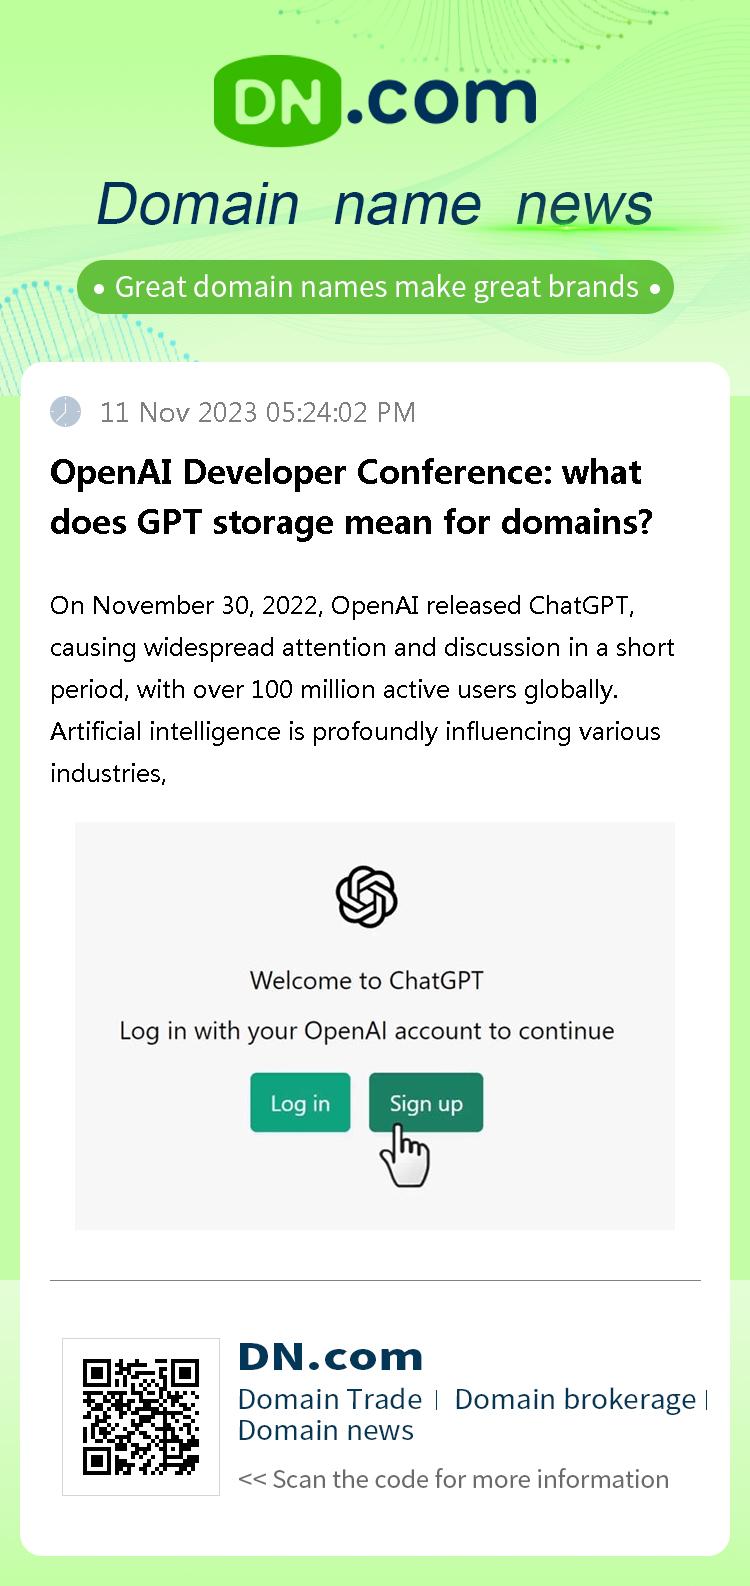 OpenAI Developer Conference: what does GPT storage mean for domains?